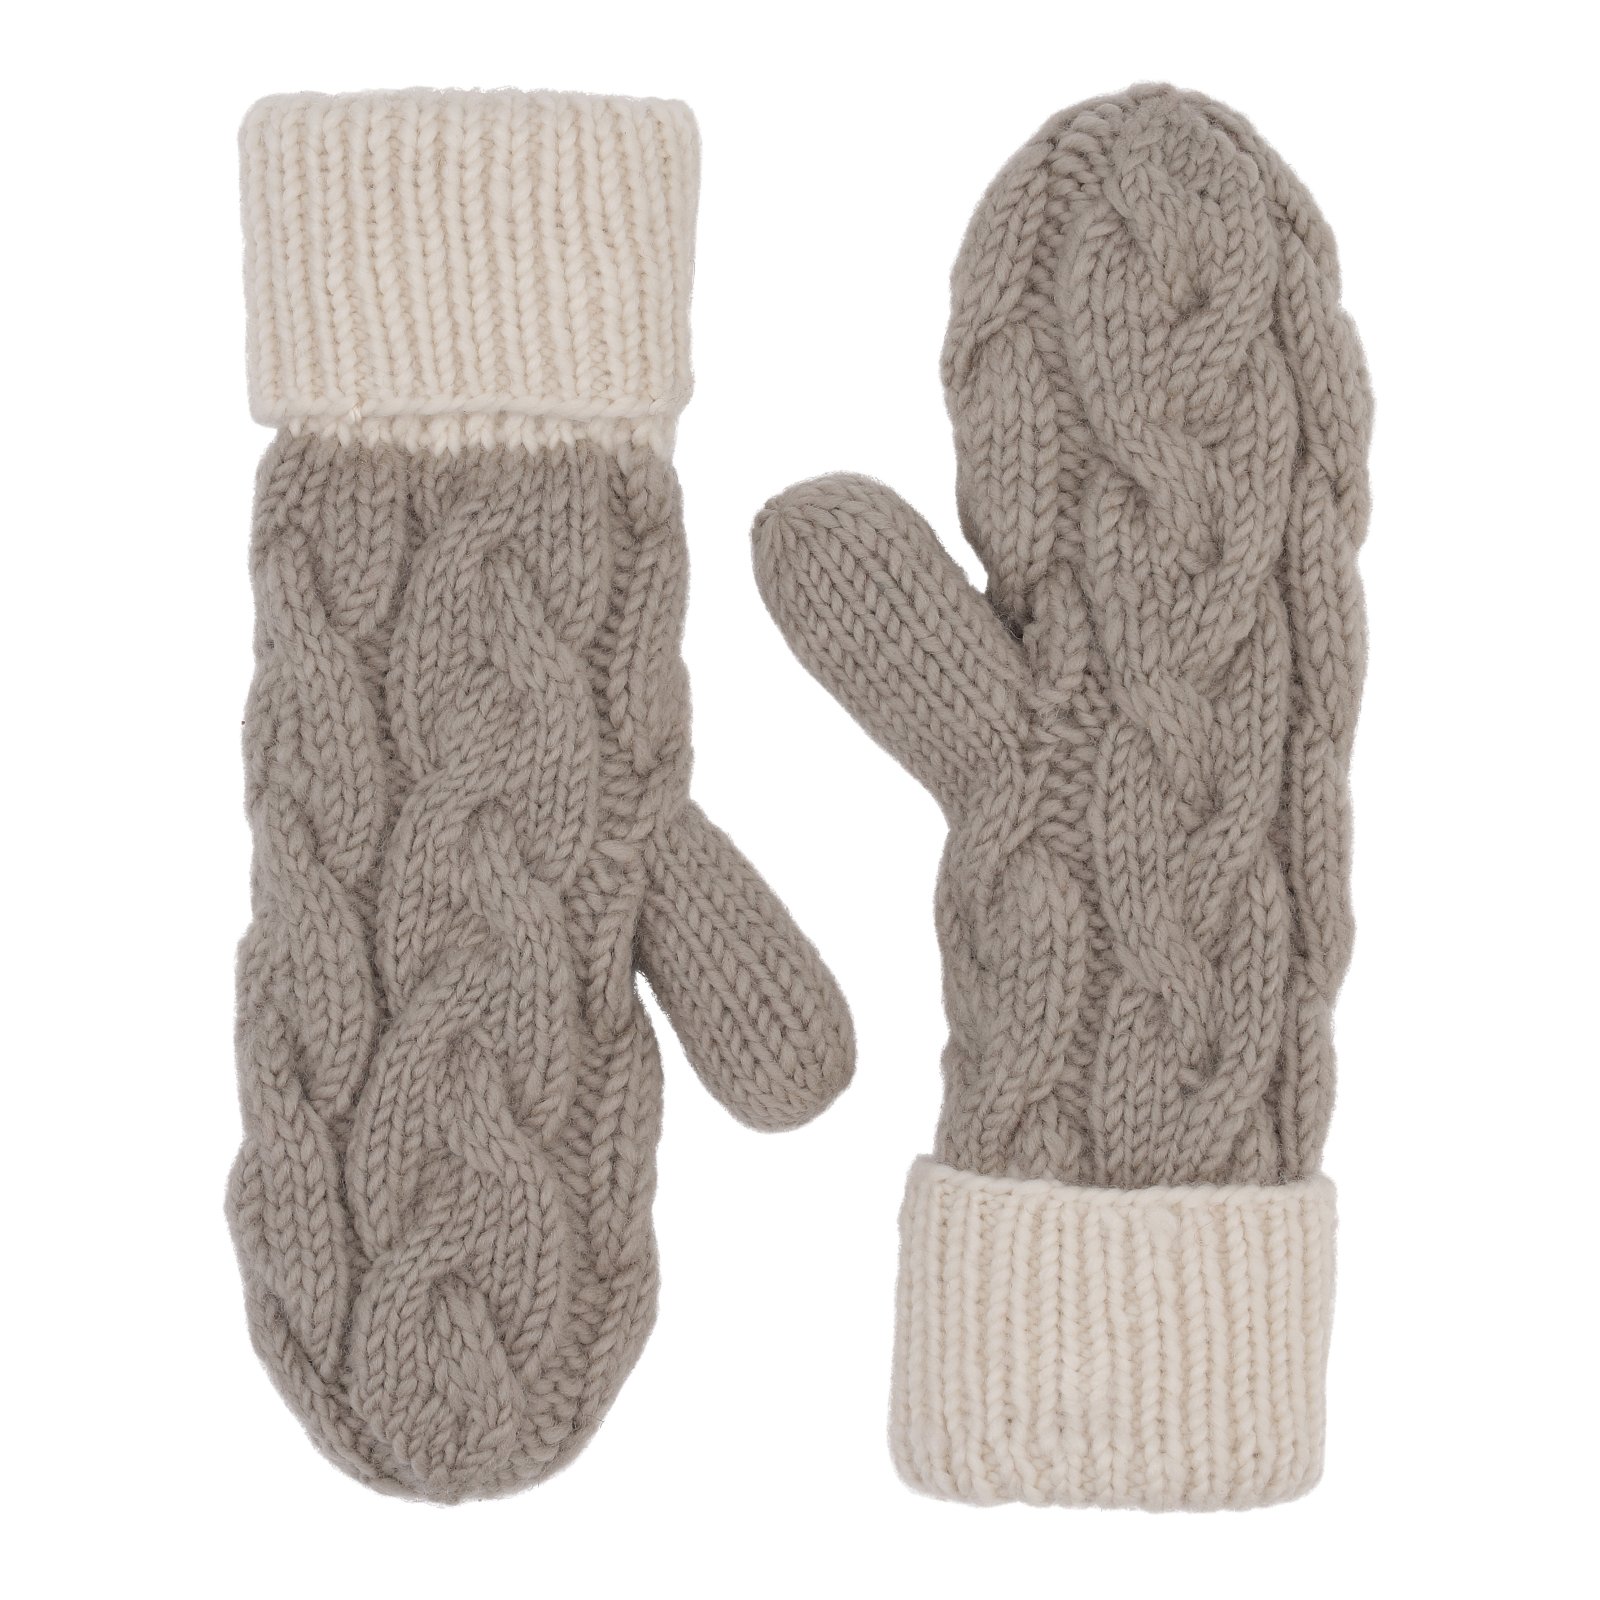 Egos Mittens Cable 2010 Grey*